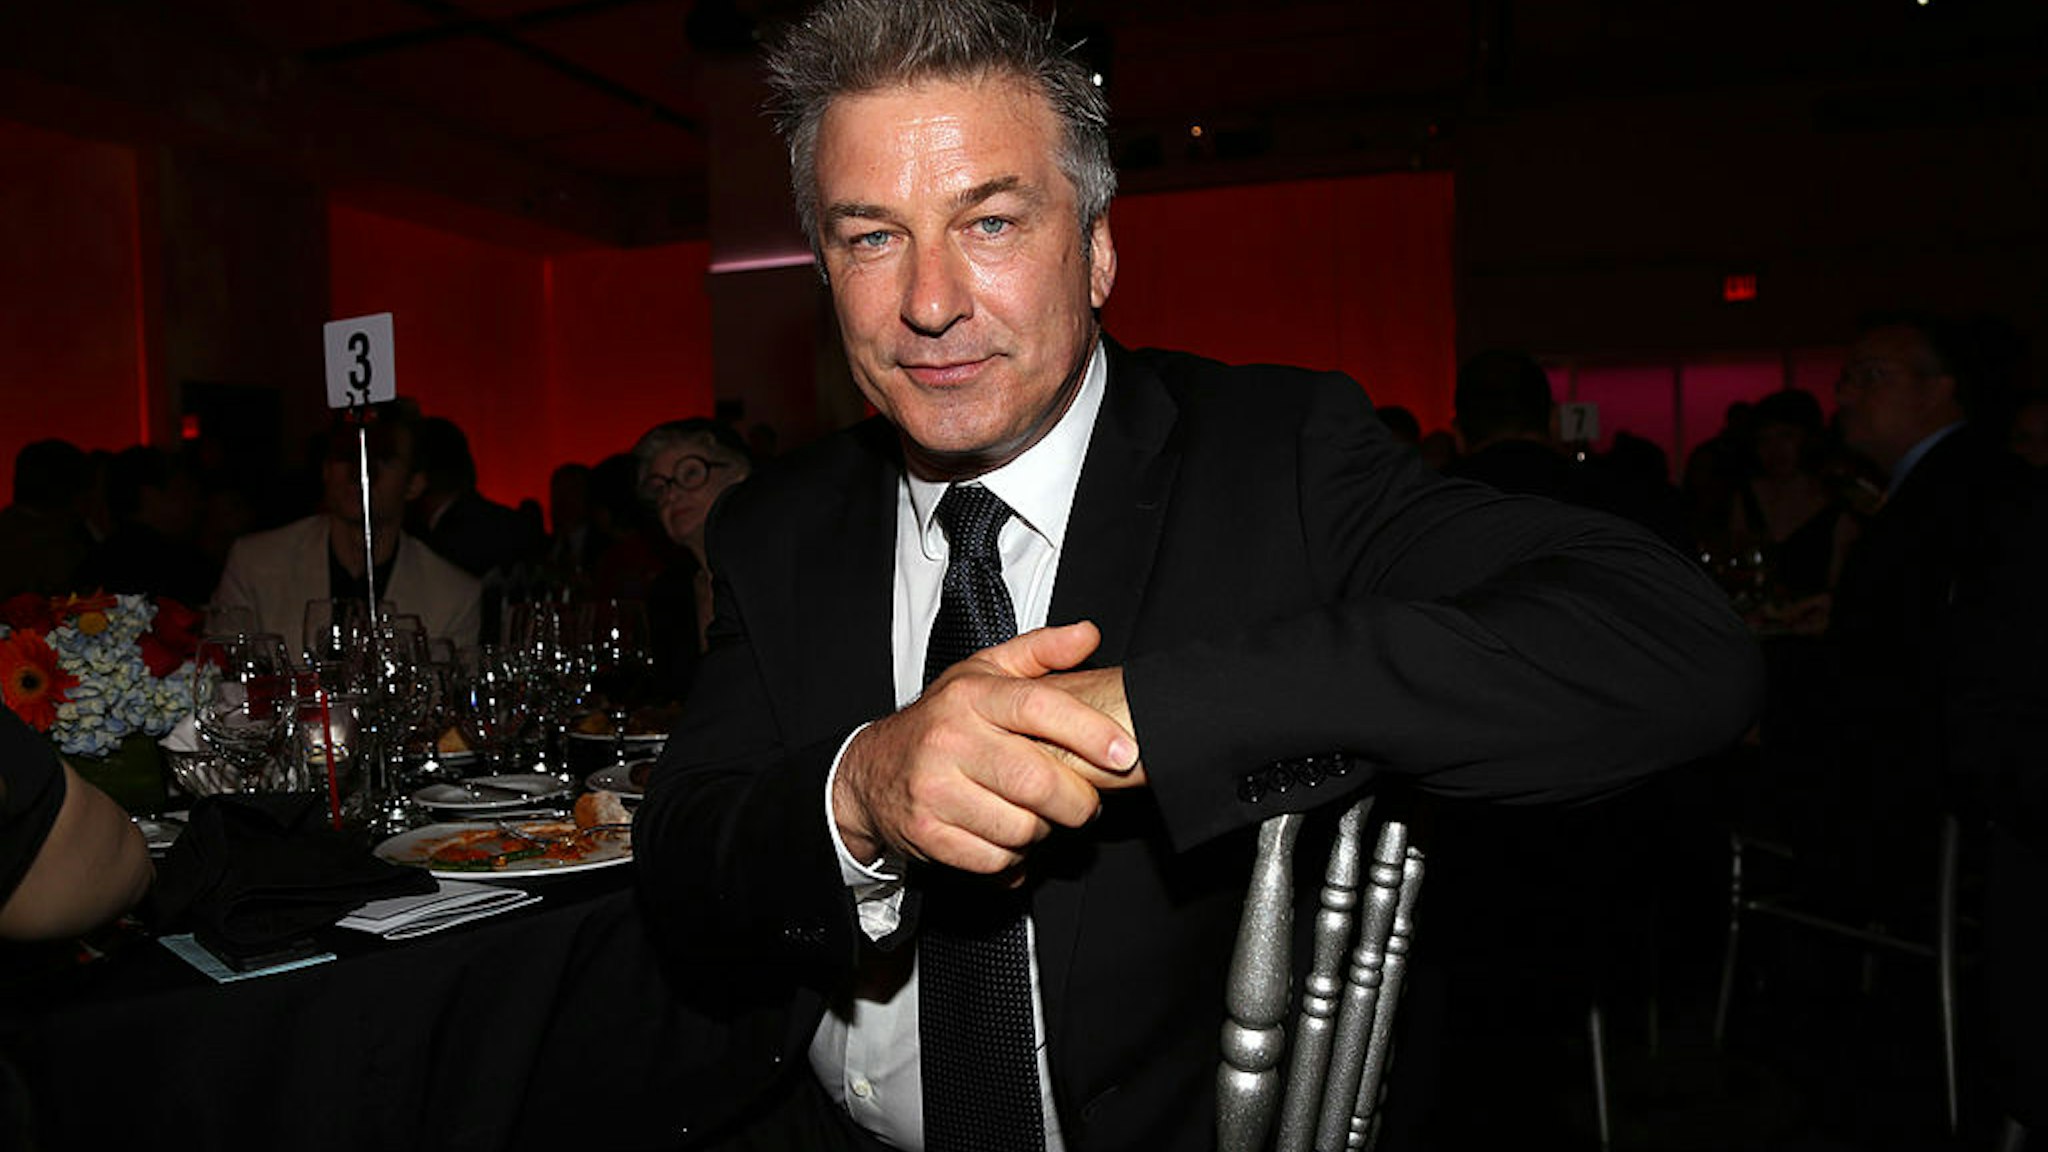 NEW YORK, NY - JUNE 10: Actor Alec Baldwin attends the 8th Annual Stella By Starlight Benefit Gala at Espace on June 10, 2013, in New York City.